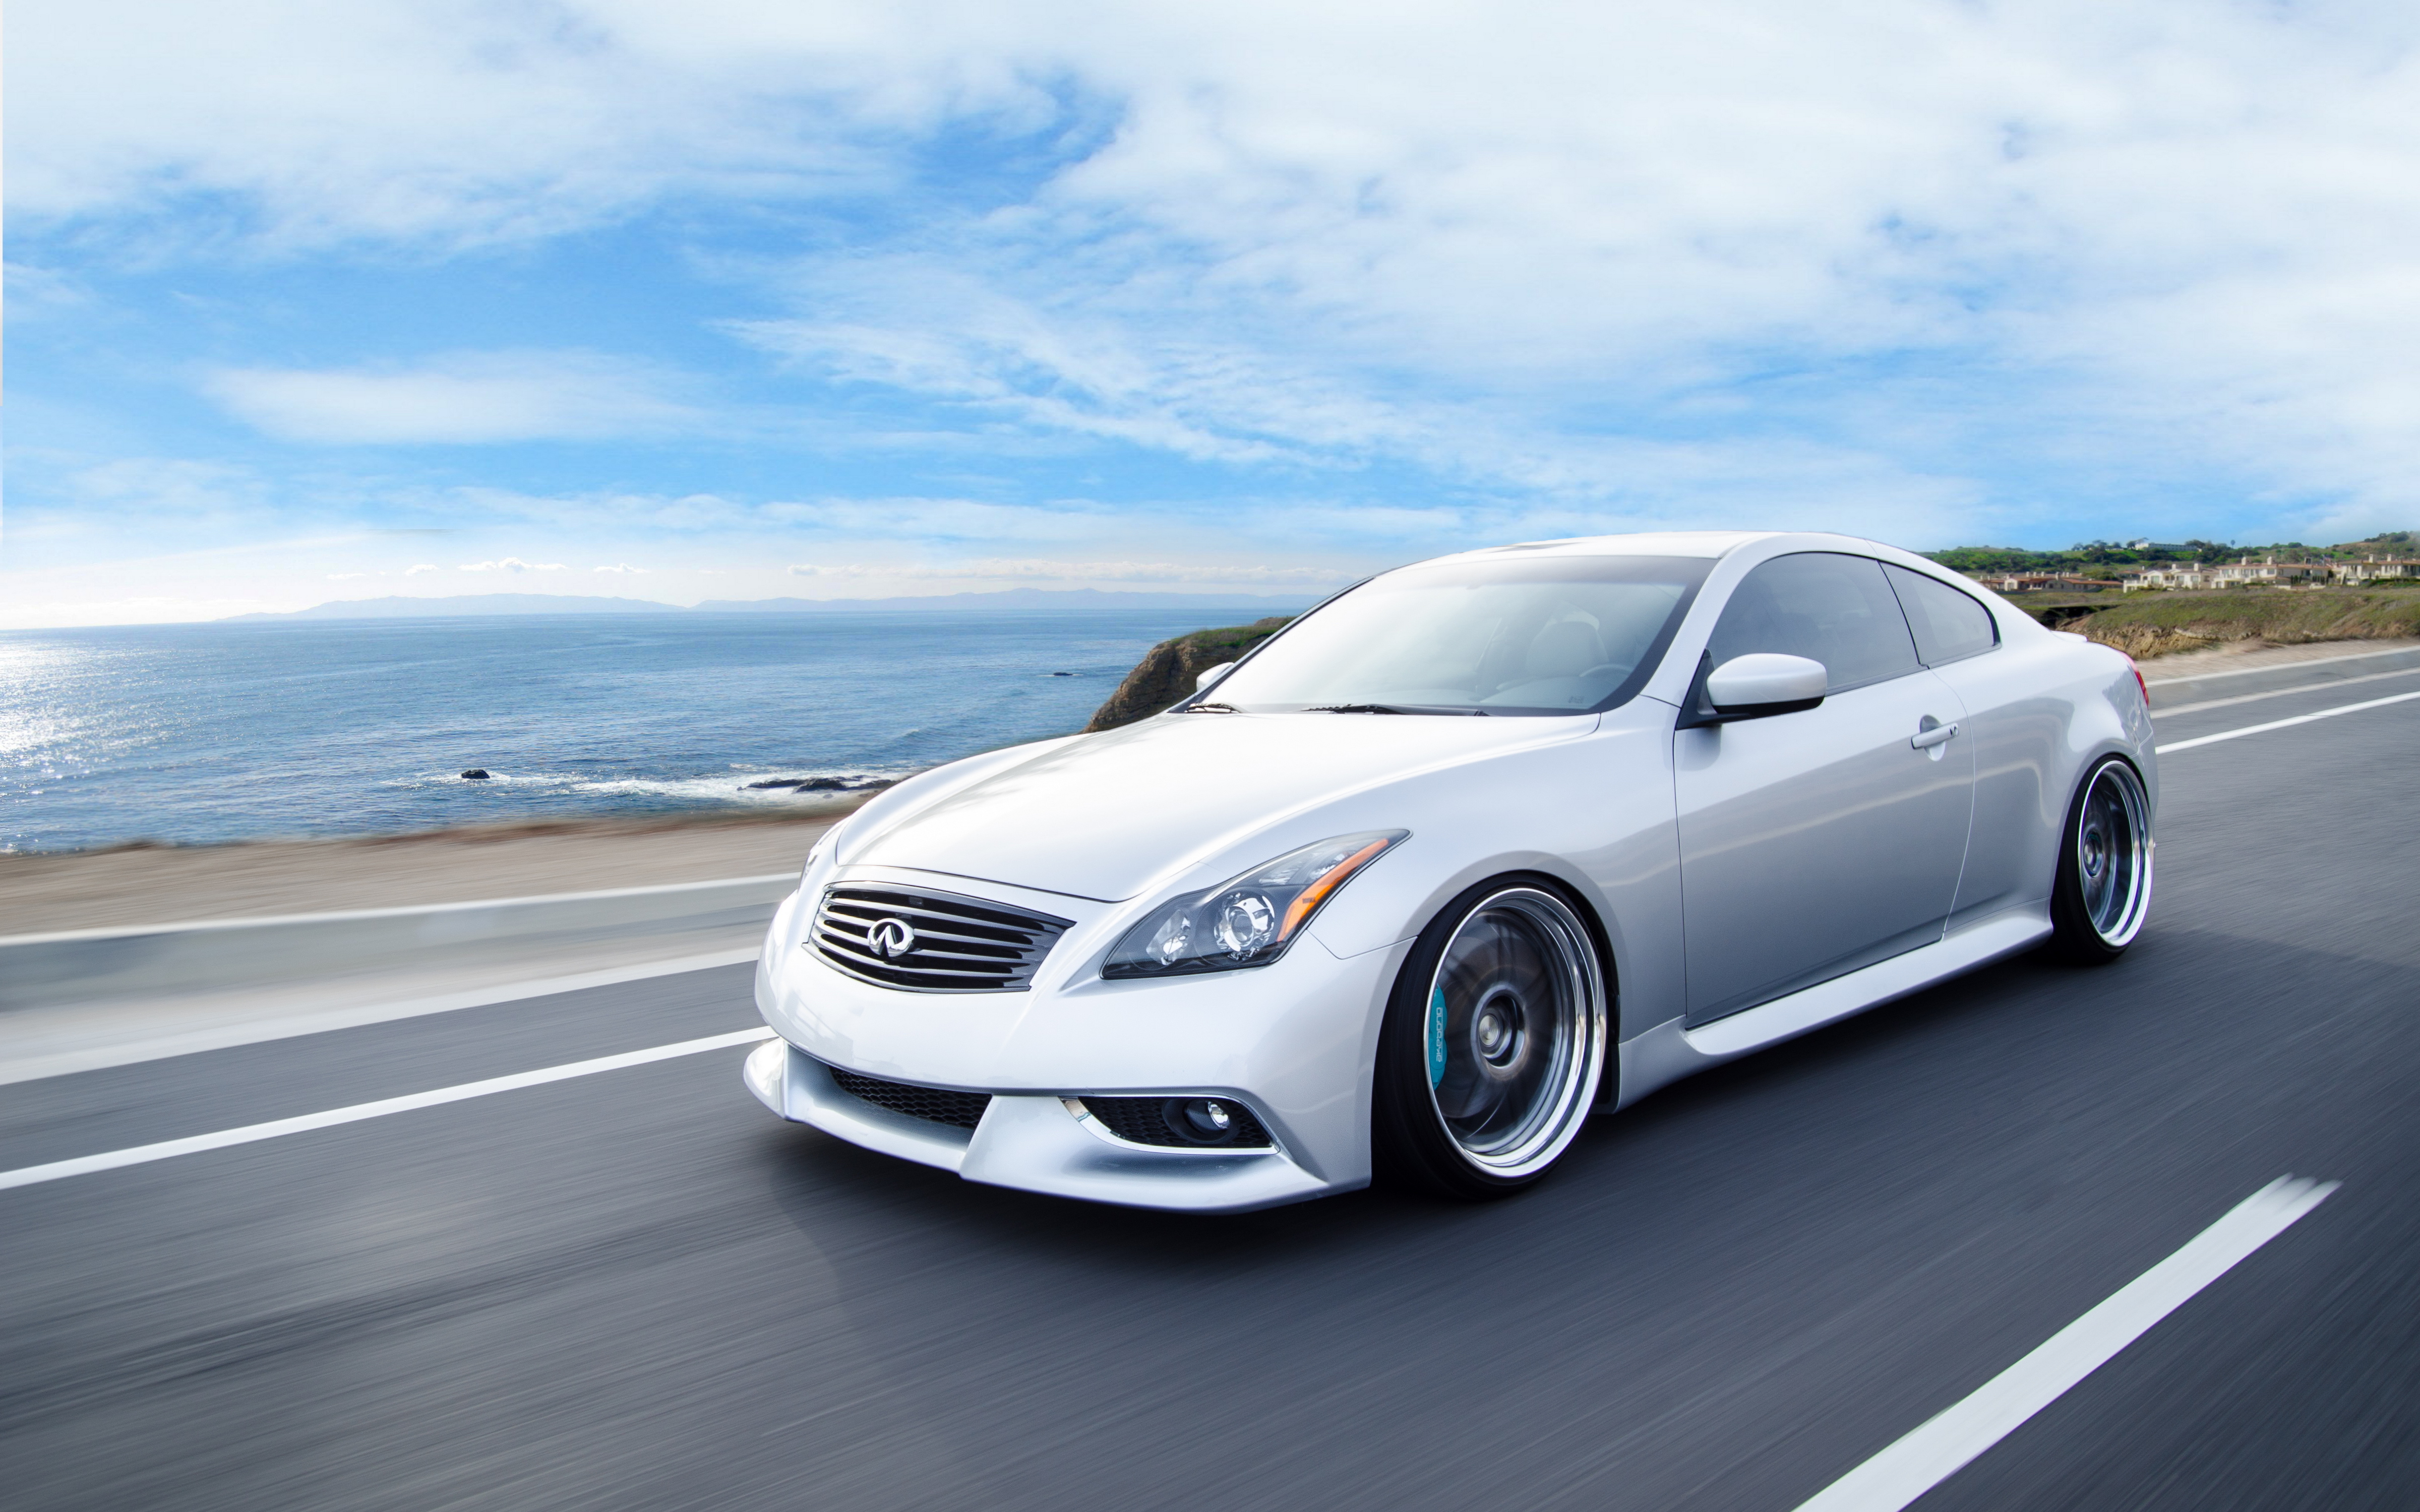 Best G37 wallpapers for phone screen